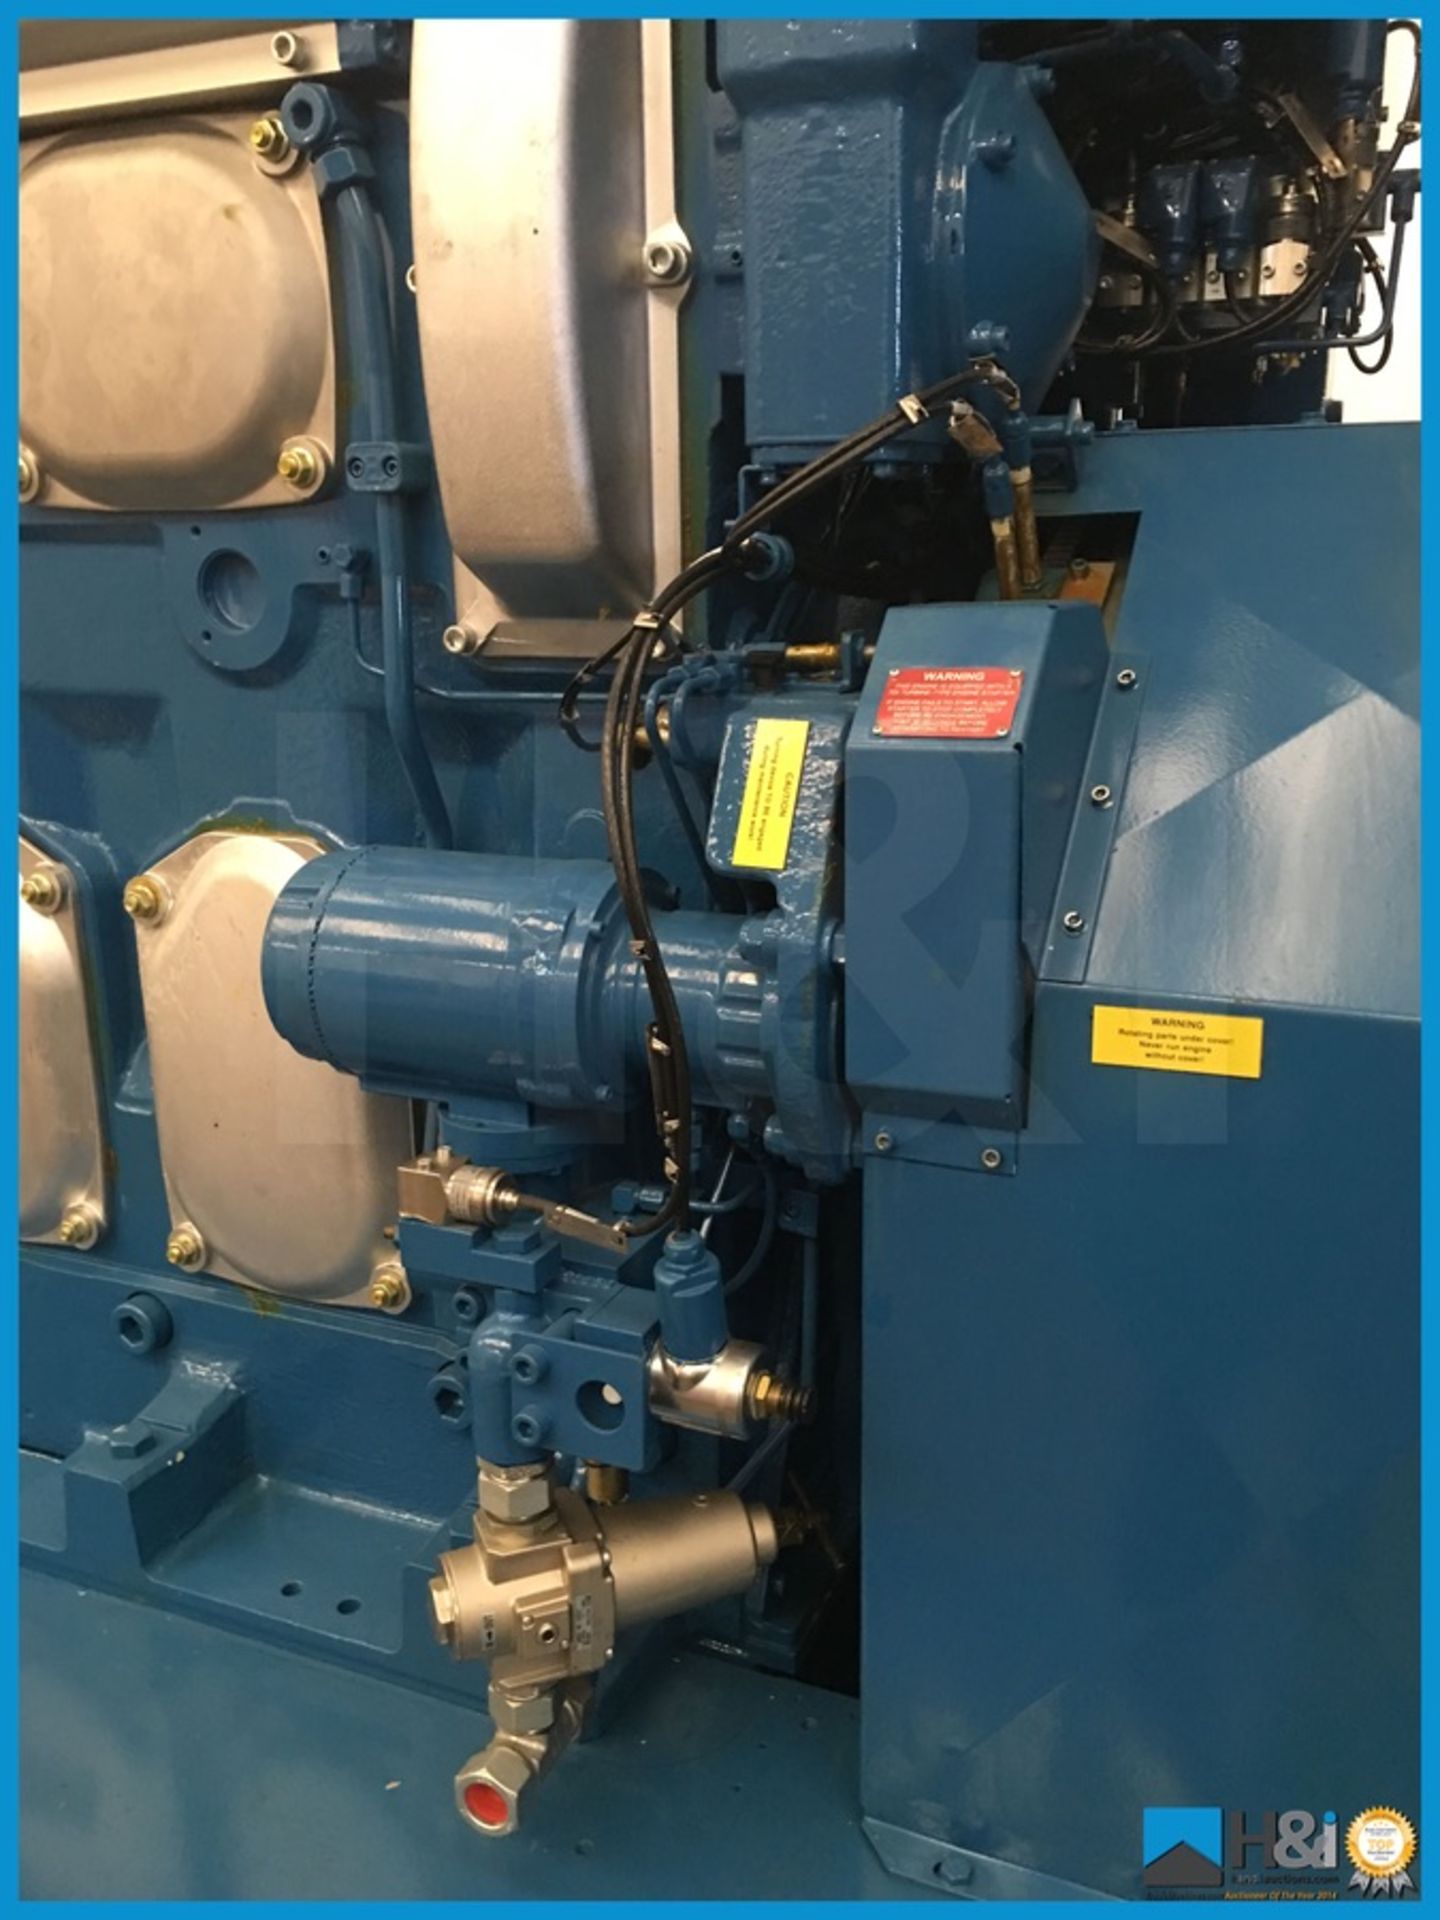 Unused Wartsila 9L20 high capacity diesel generator manufactured in 2013 for a large marine - Image 6 of 17